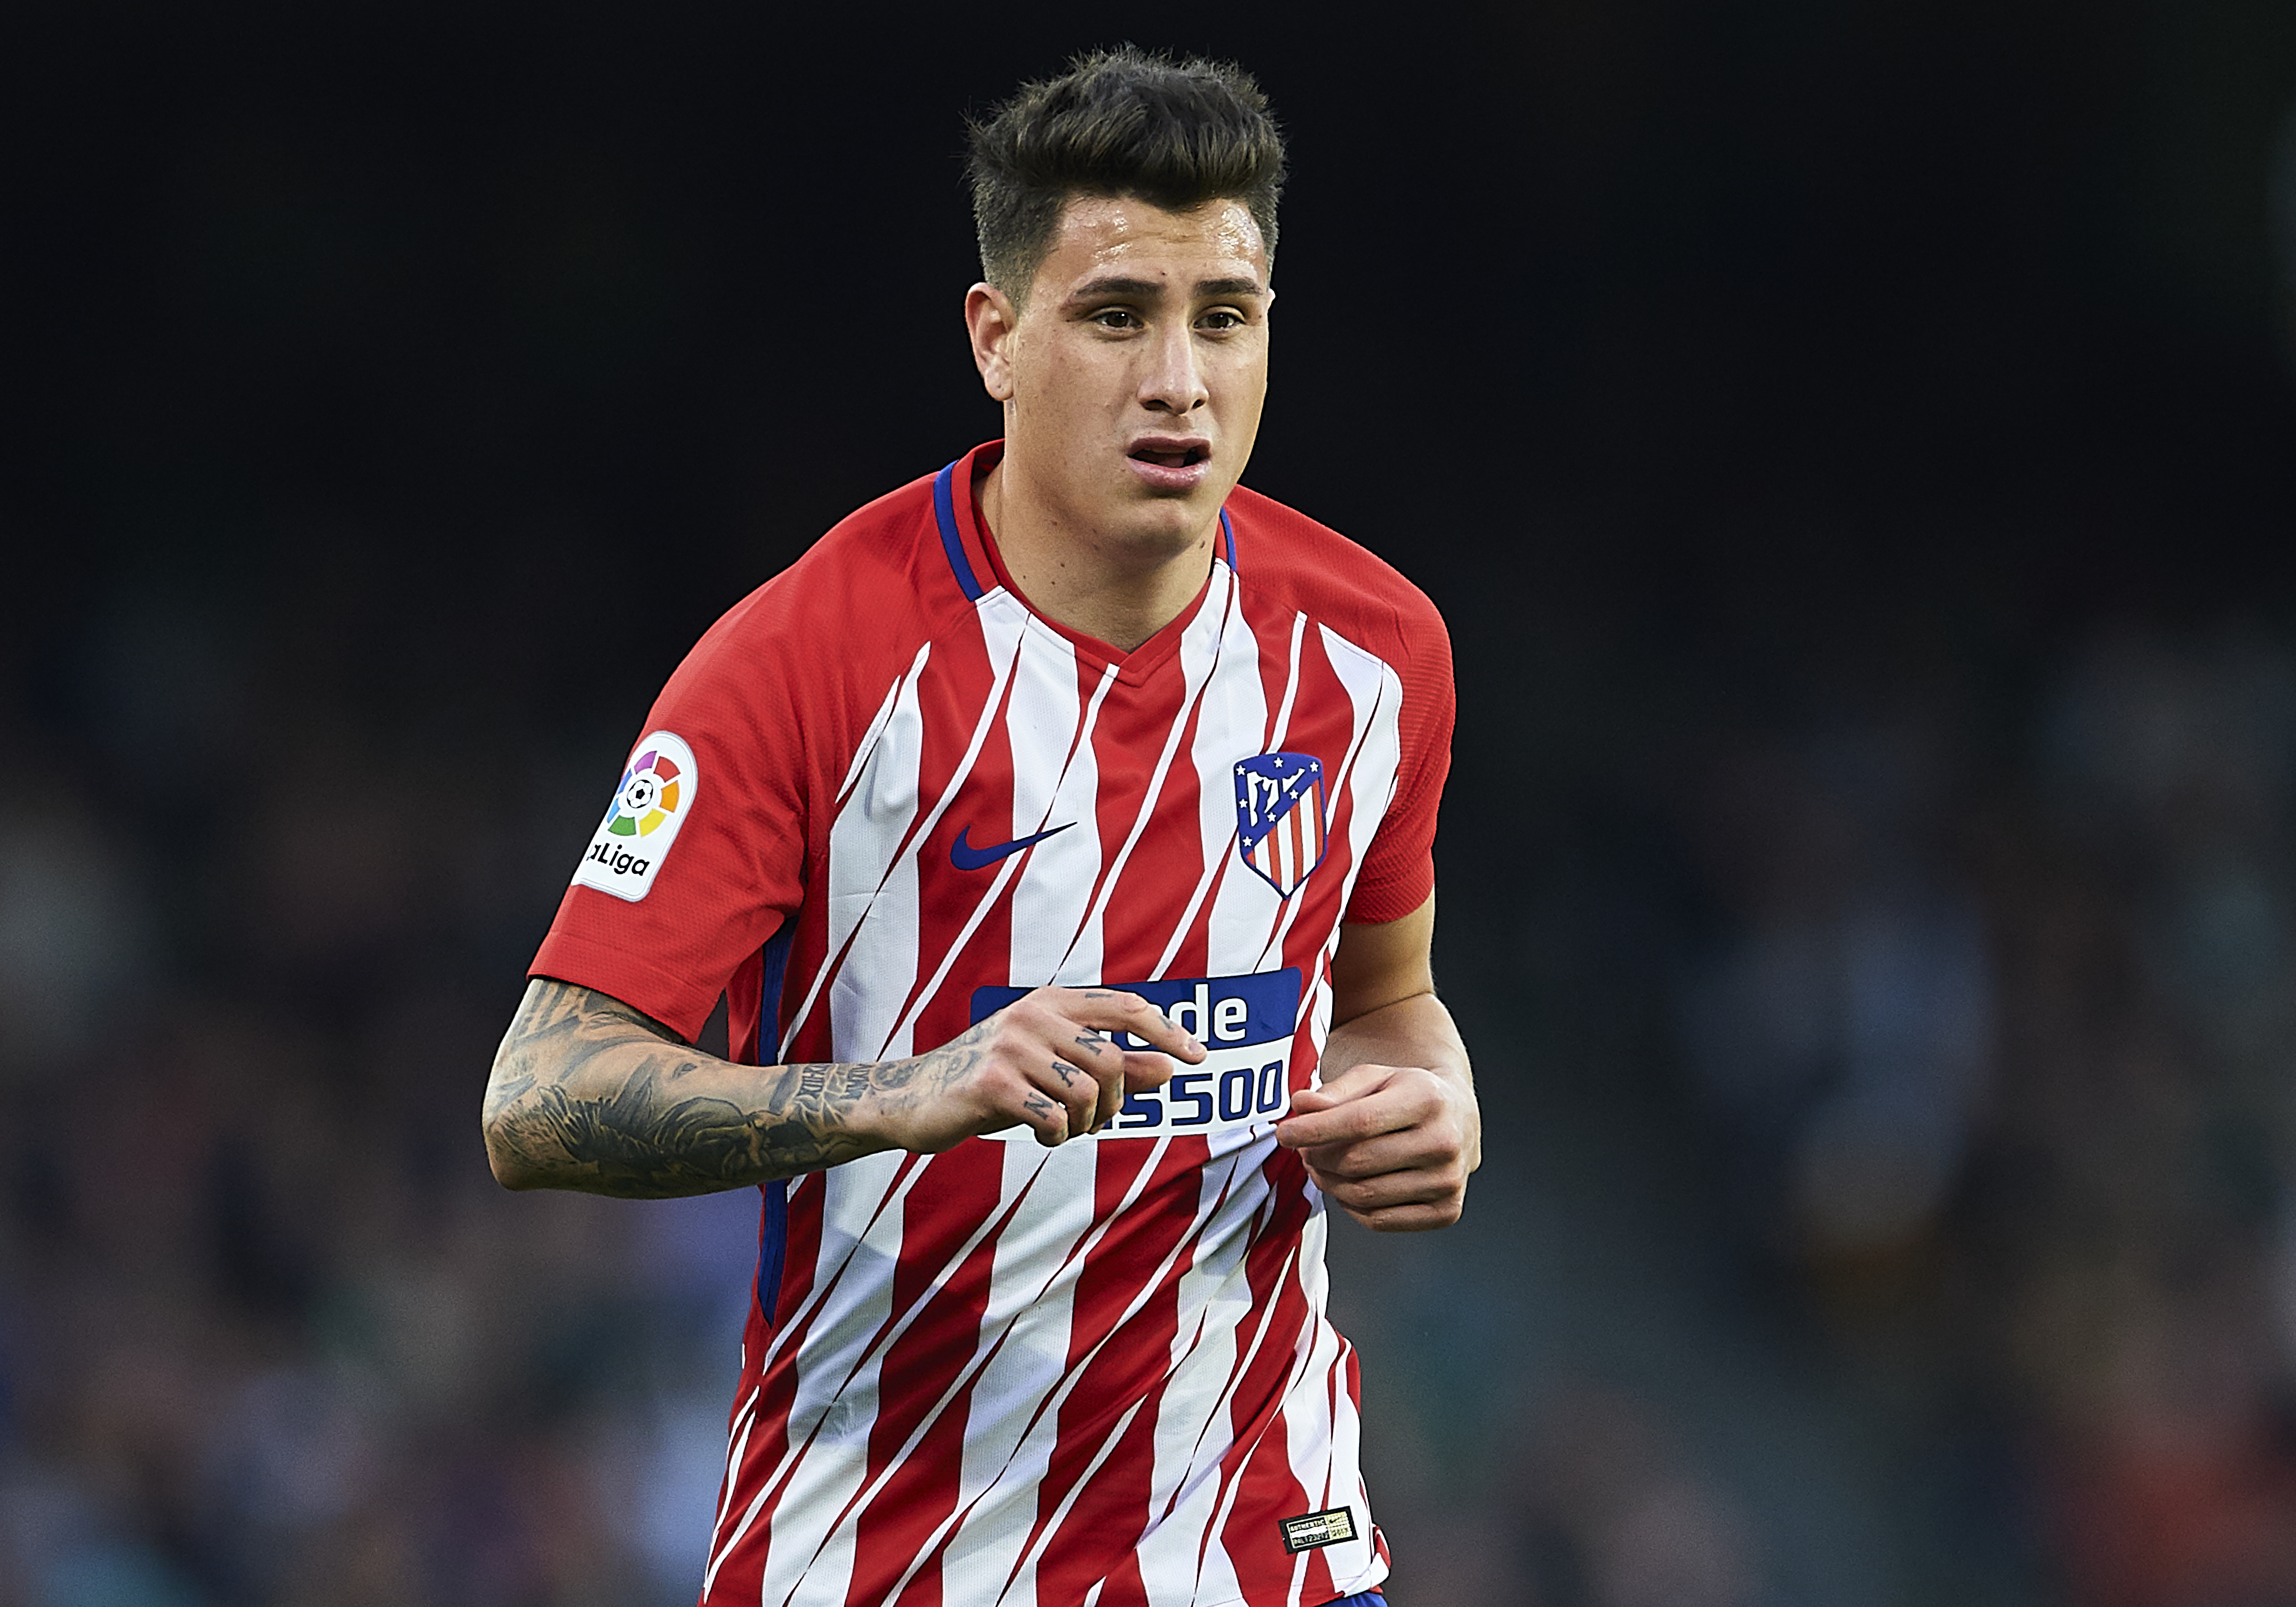  Juventus wants to sign another Atletico Madrid player